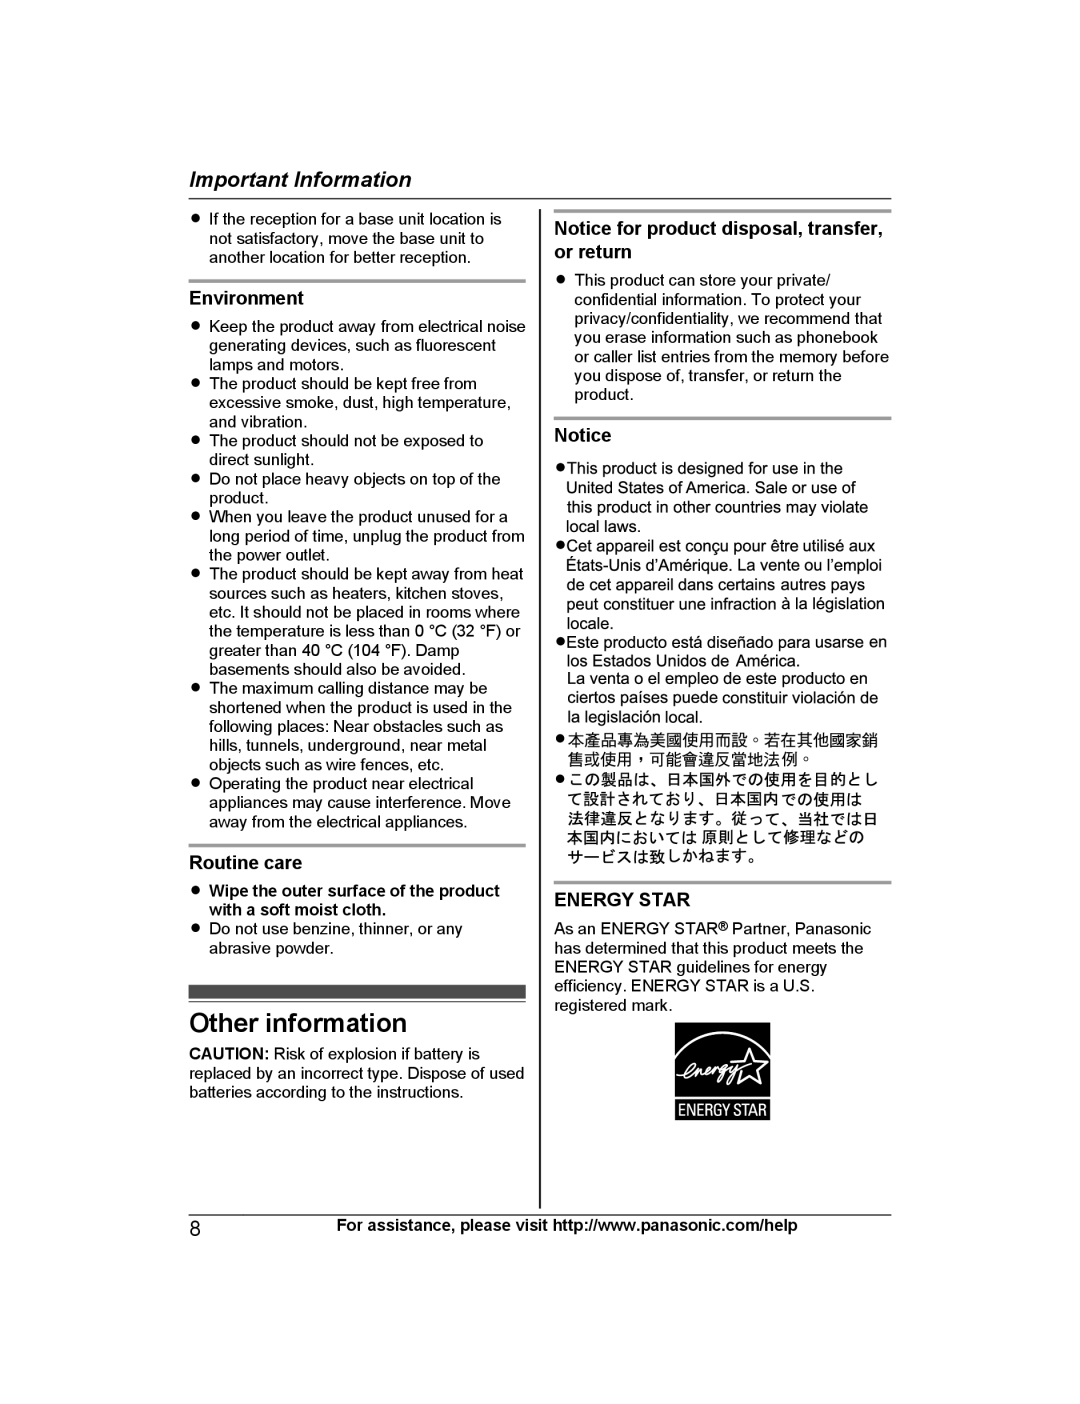 Panasonic KX-TGD213 Other information, Environment, Routine care, Notice for product disposal, transfer, or return 